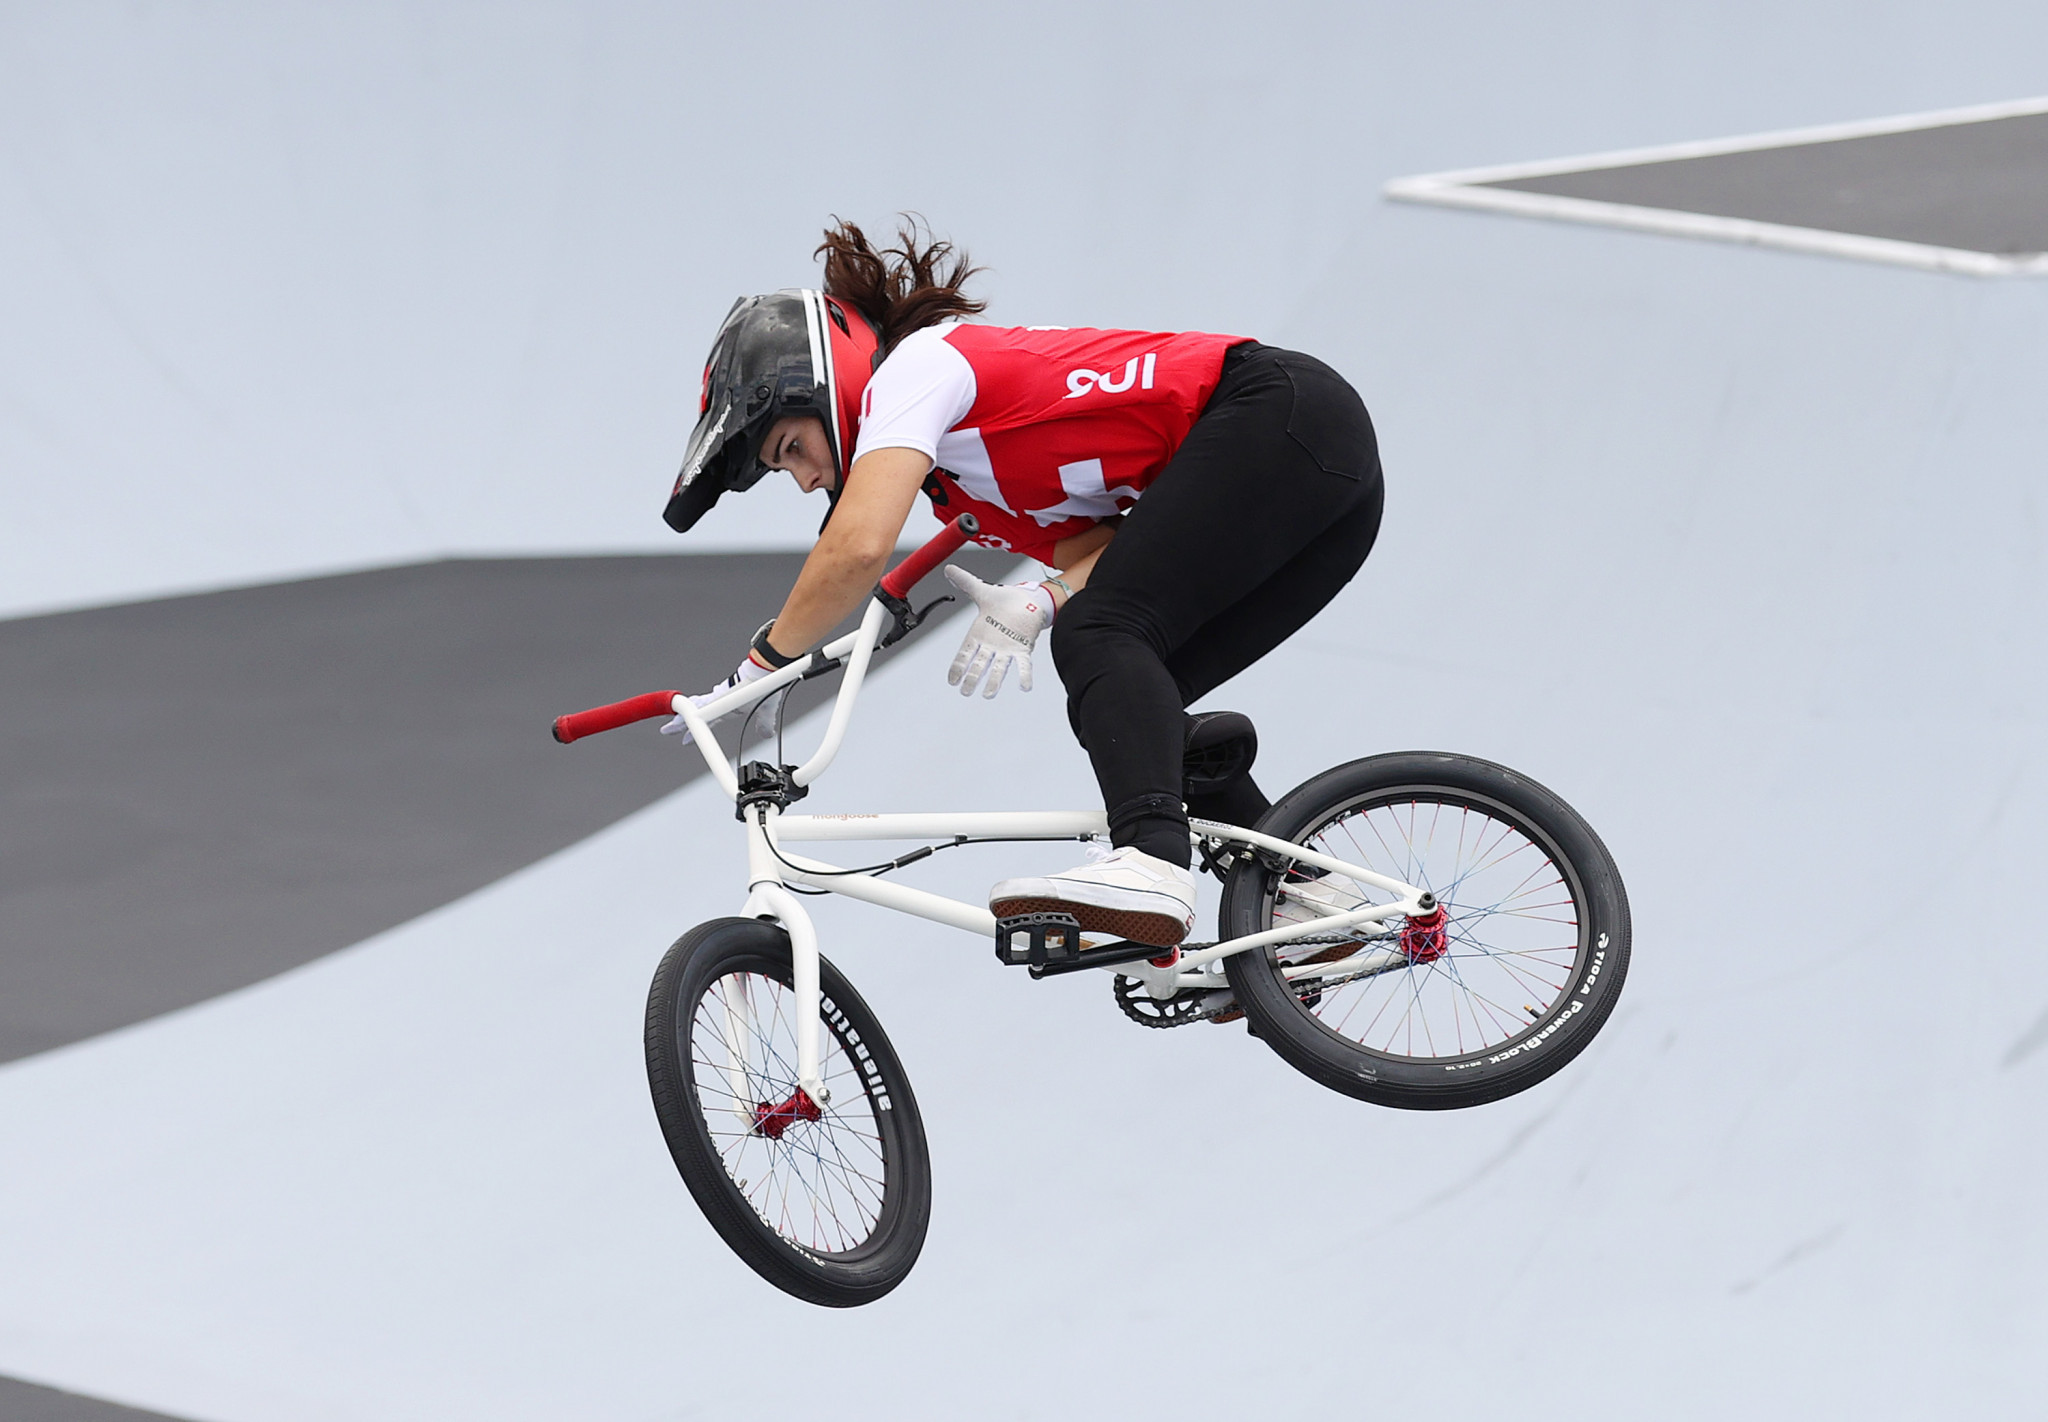 Nikita Ducarroz won bronze at the women's BMX freestyle event at Tokyo 2020 in the sport's Olympic debut ©Getty Images